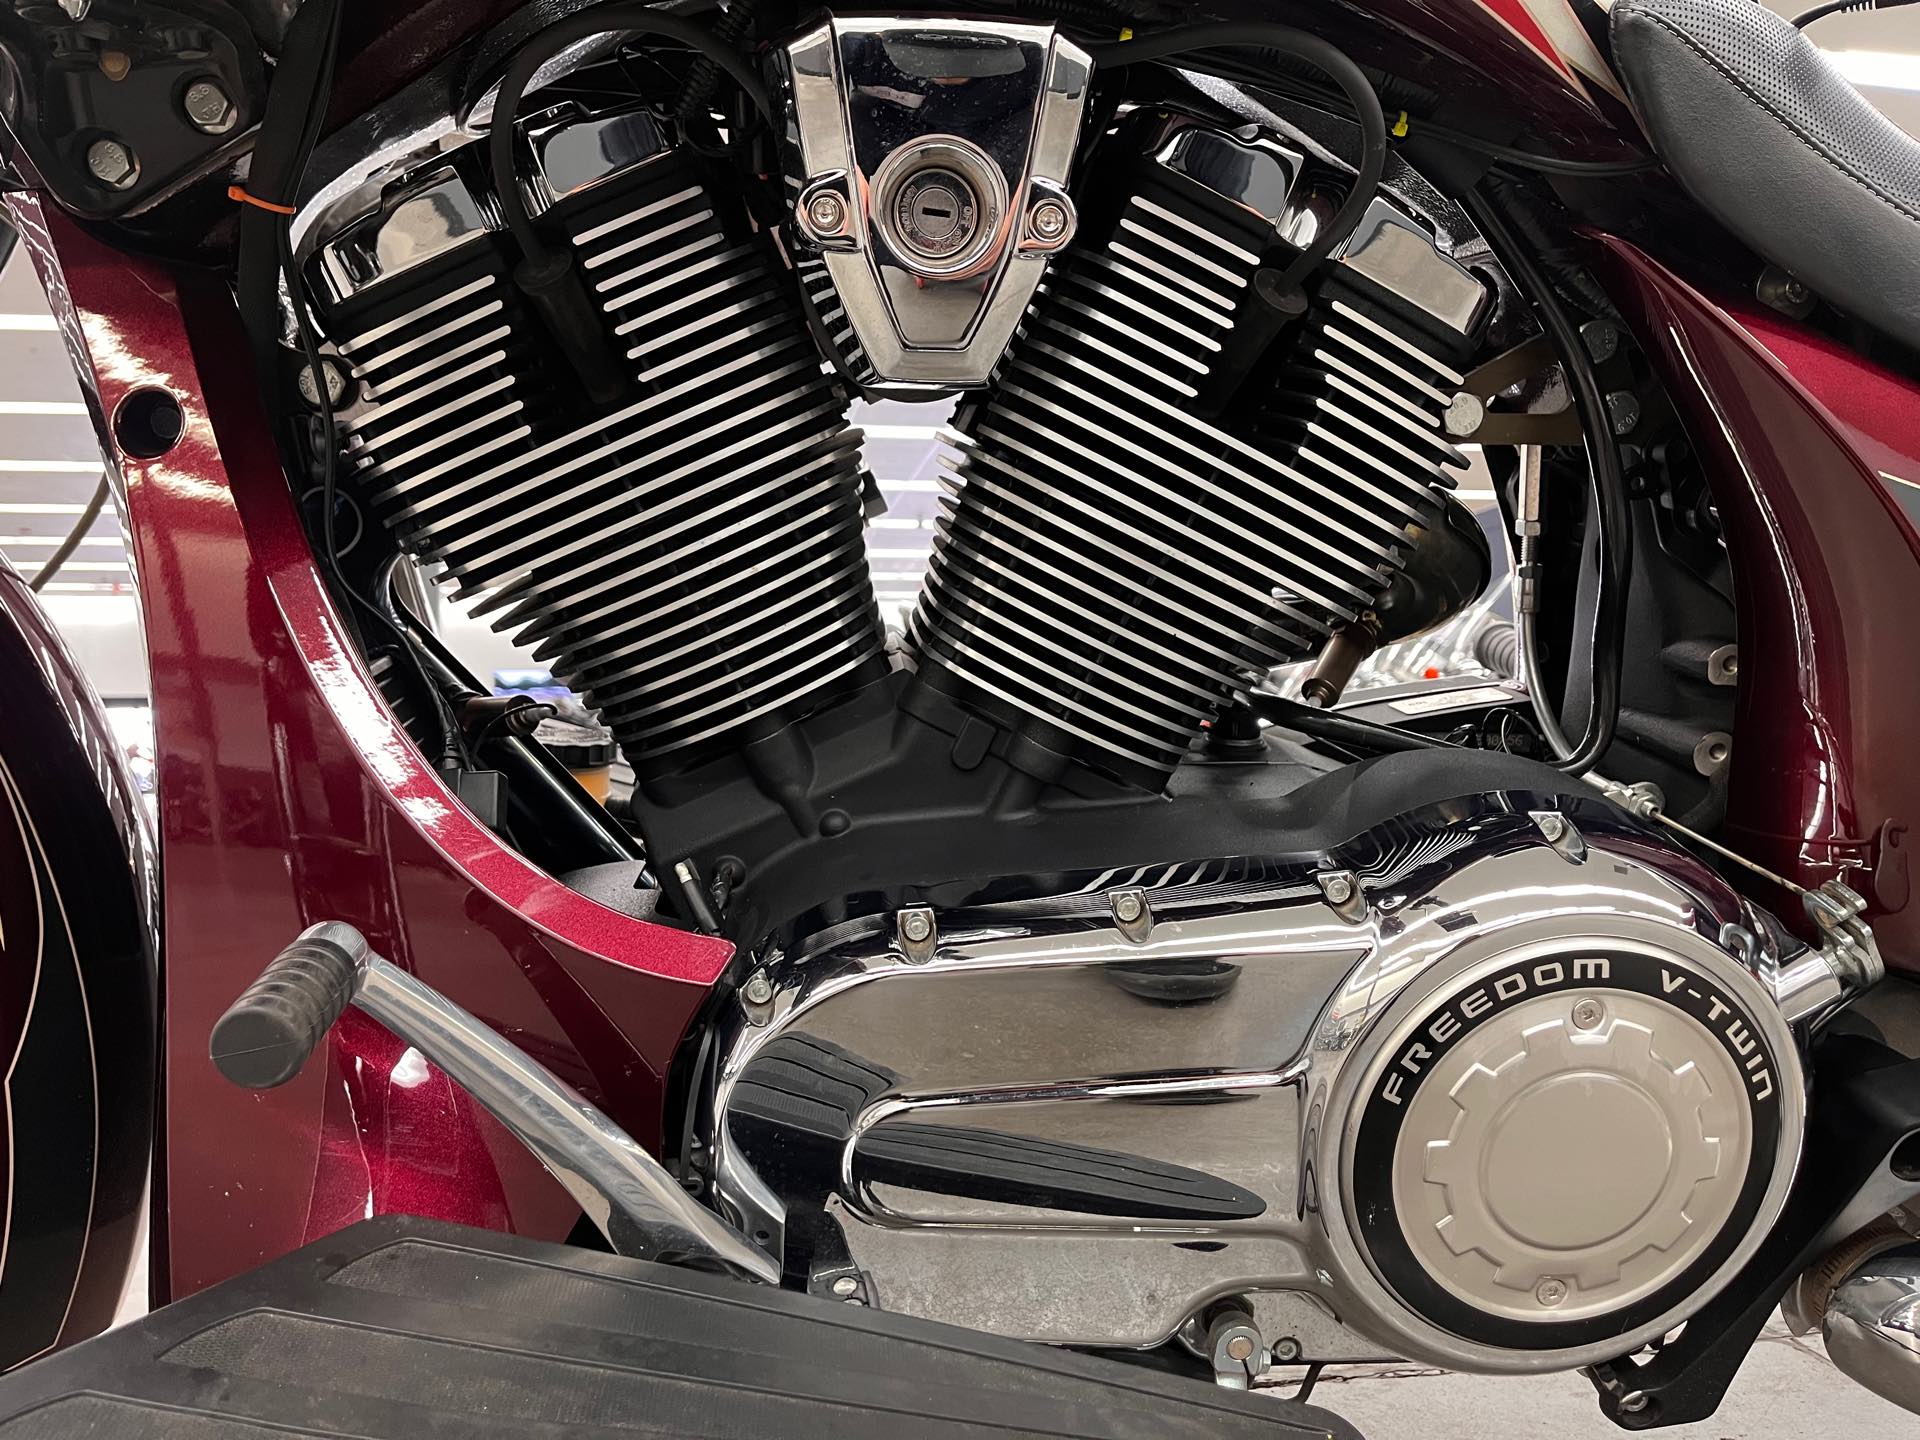 2015 Victory Magnum Ness at Aces Motorcycles - Denver